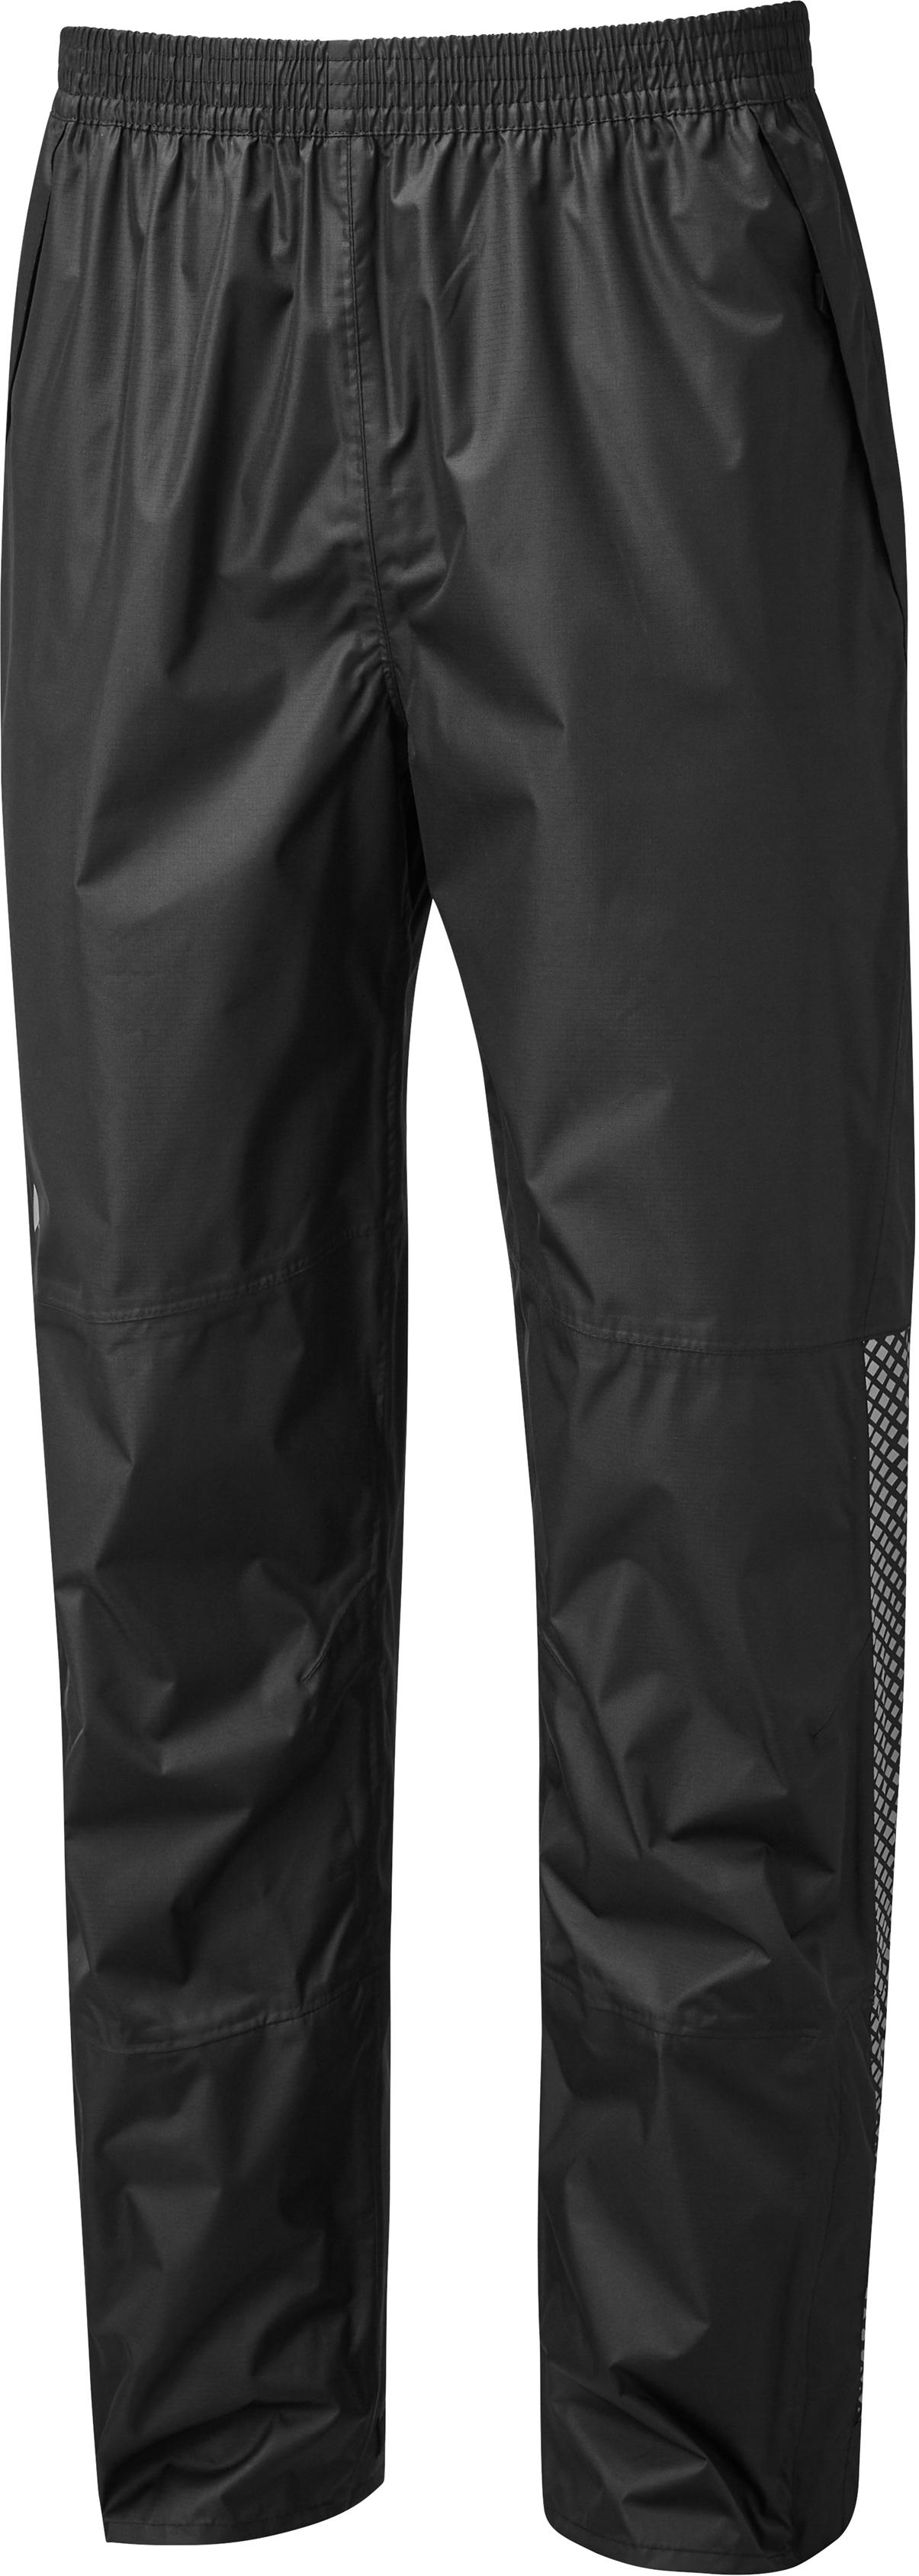 Altura Nightvision Waterproof Overtrouser Black Xx Large